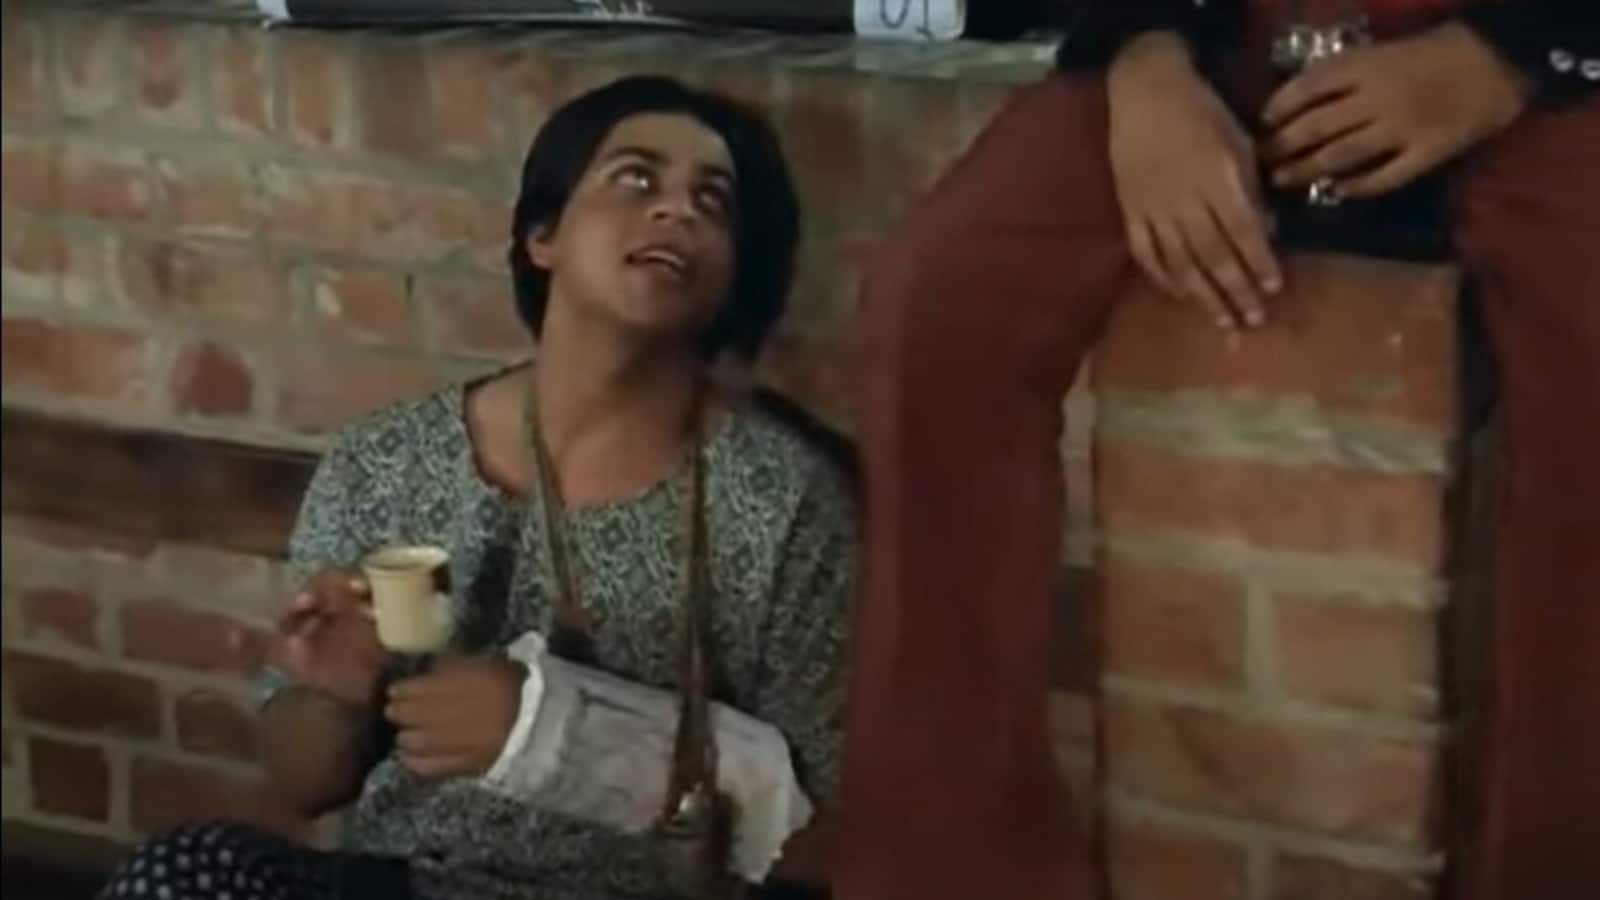 Revisiting Shah Rukh Khan’s forgotten ‘debut’ film in which he played a gay college student alongside Arundhati Roy